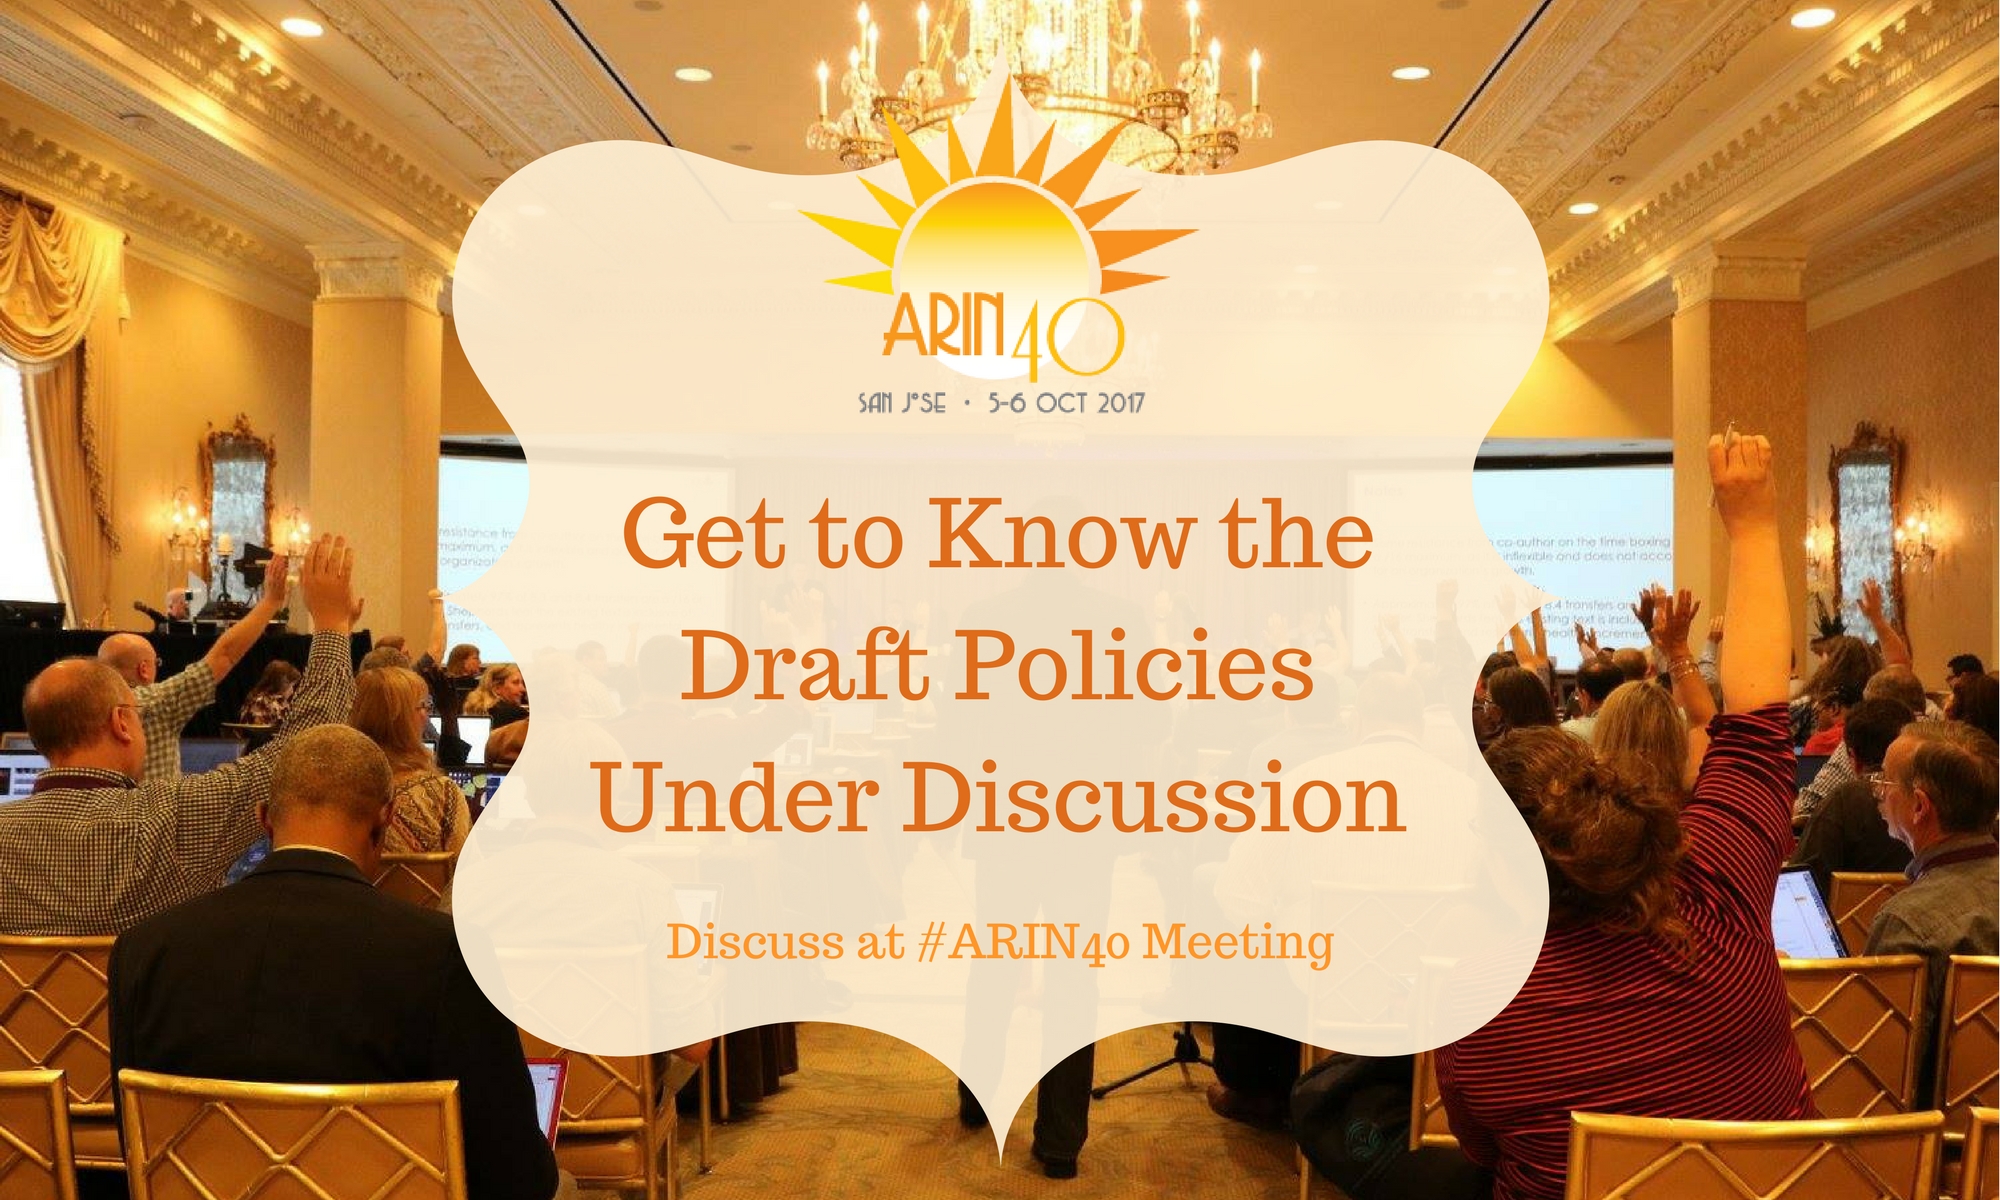 Get To Know The Draft Policies Under Discussion at ARIN 40